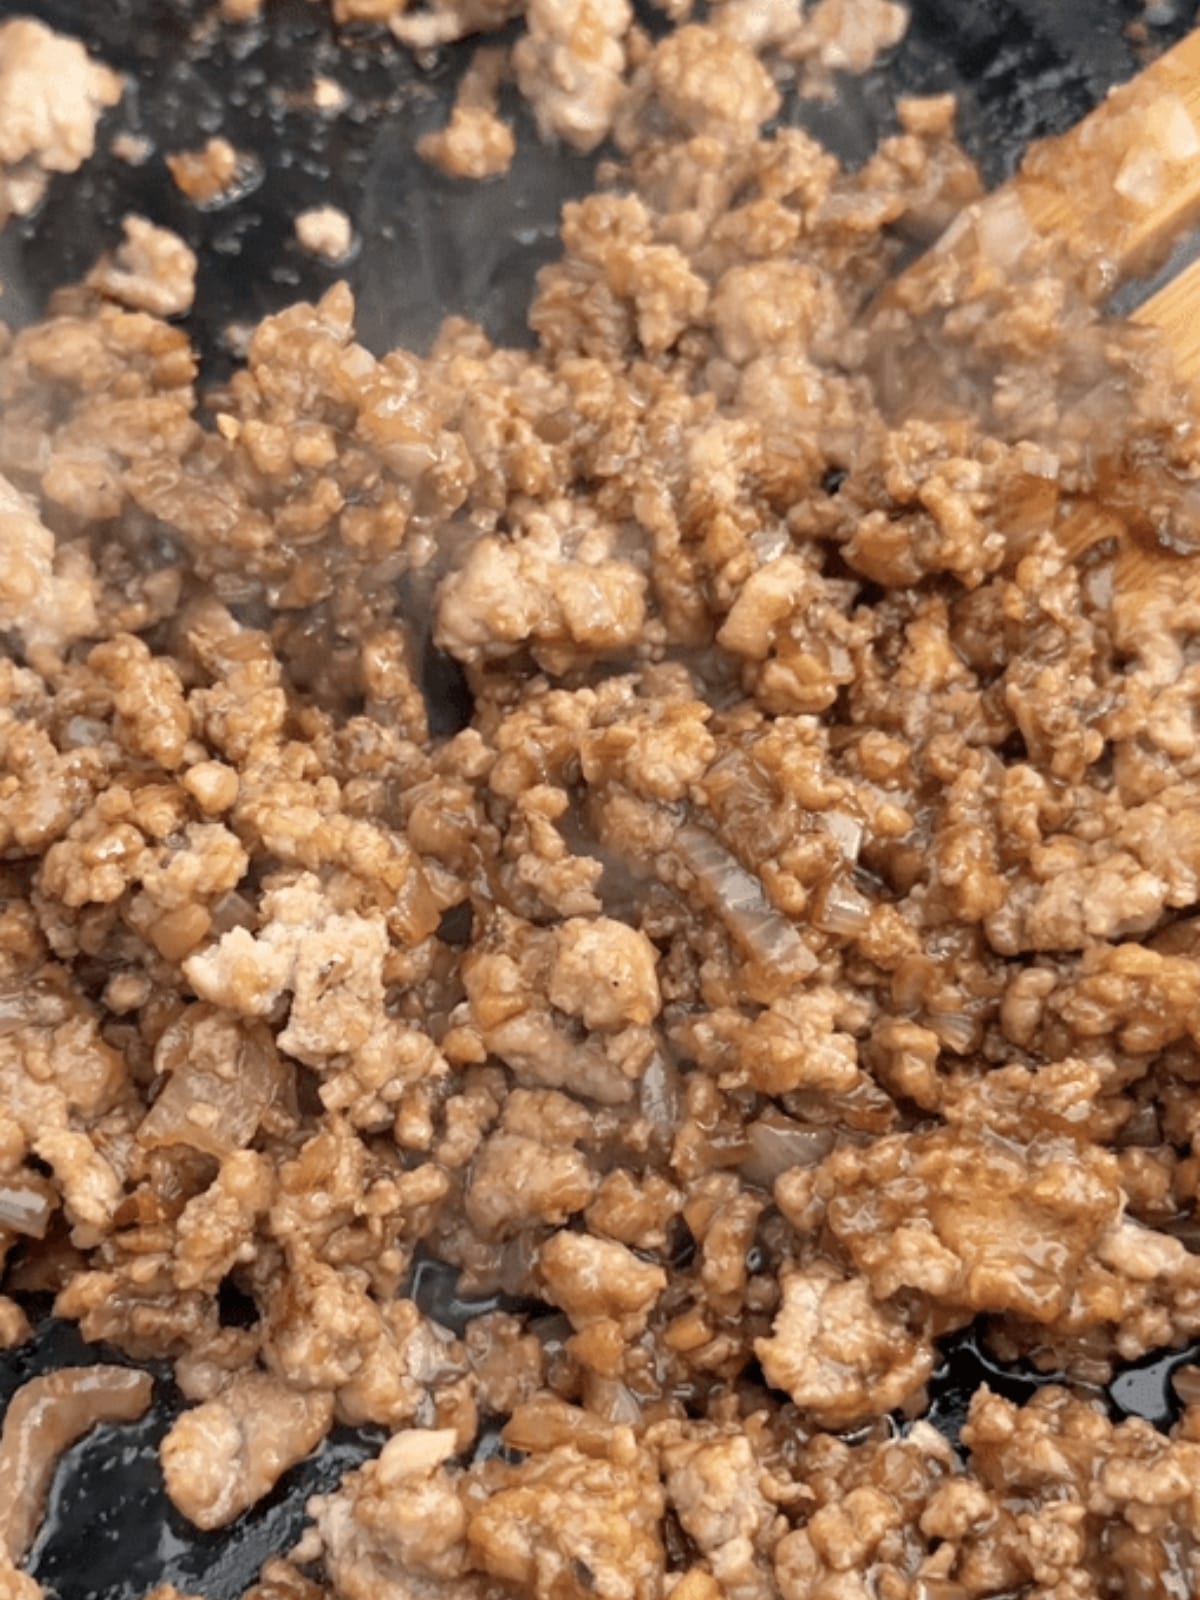 Cooked ground pork in pan.